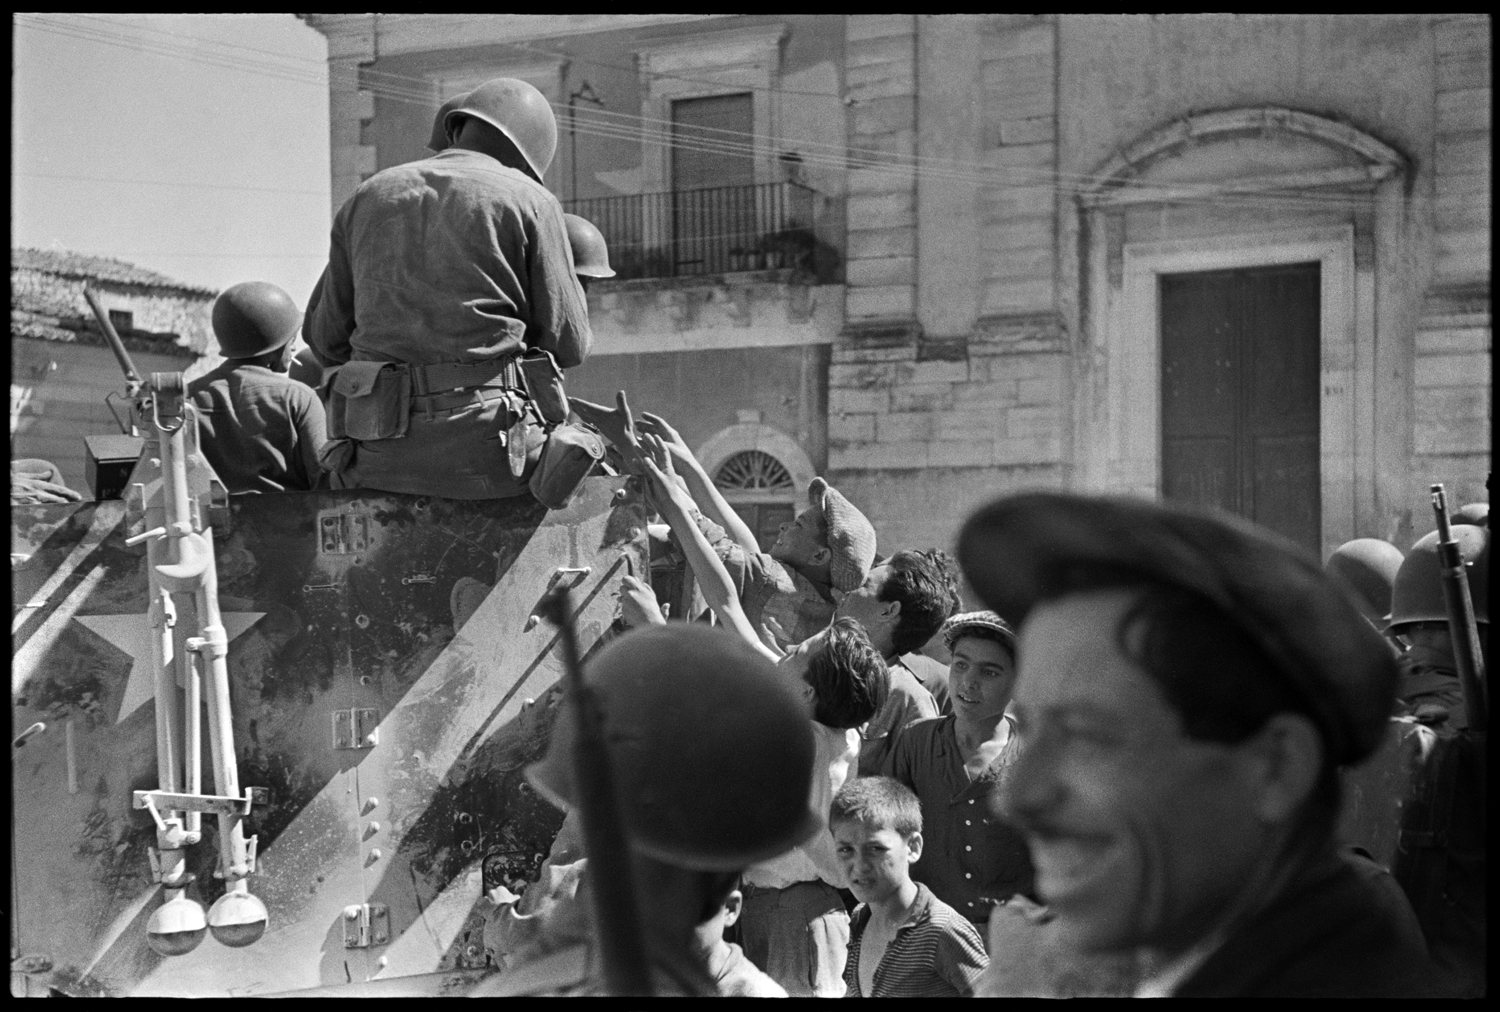 Crowd in Palermo, Sicily 1943.